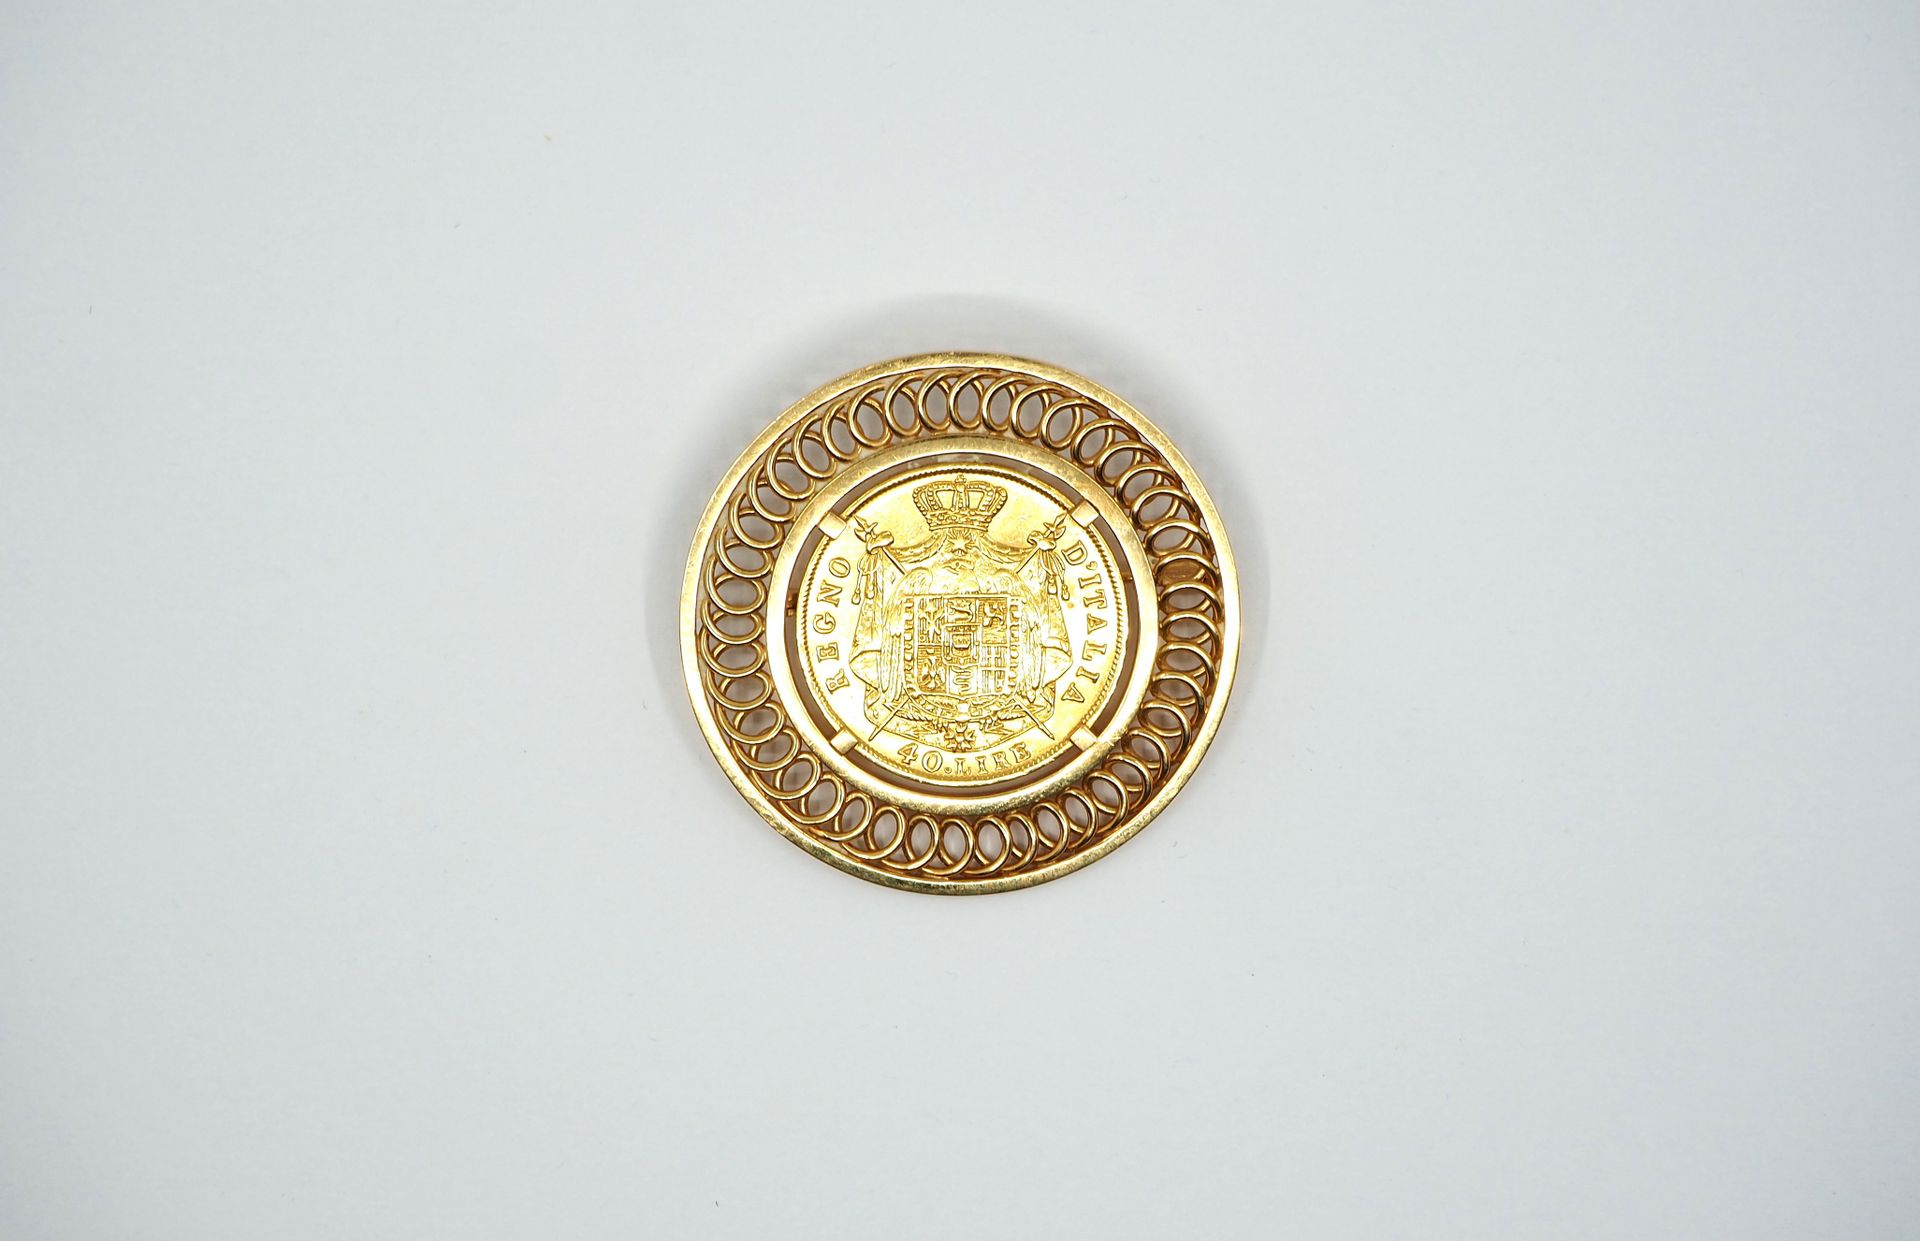 Null Yellow gold brooch set with a 40 lire 1810 gold coin
Pds 25.92 grs